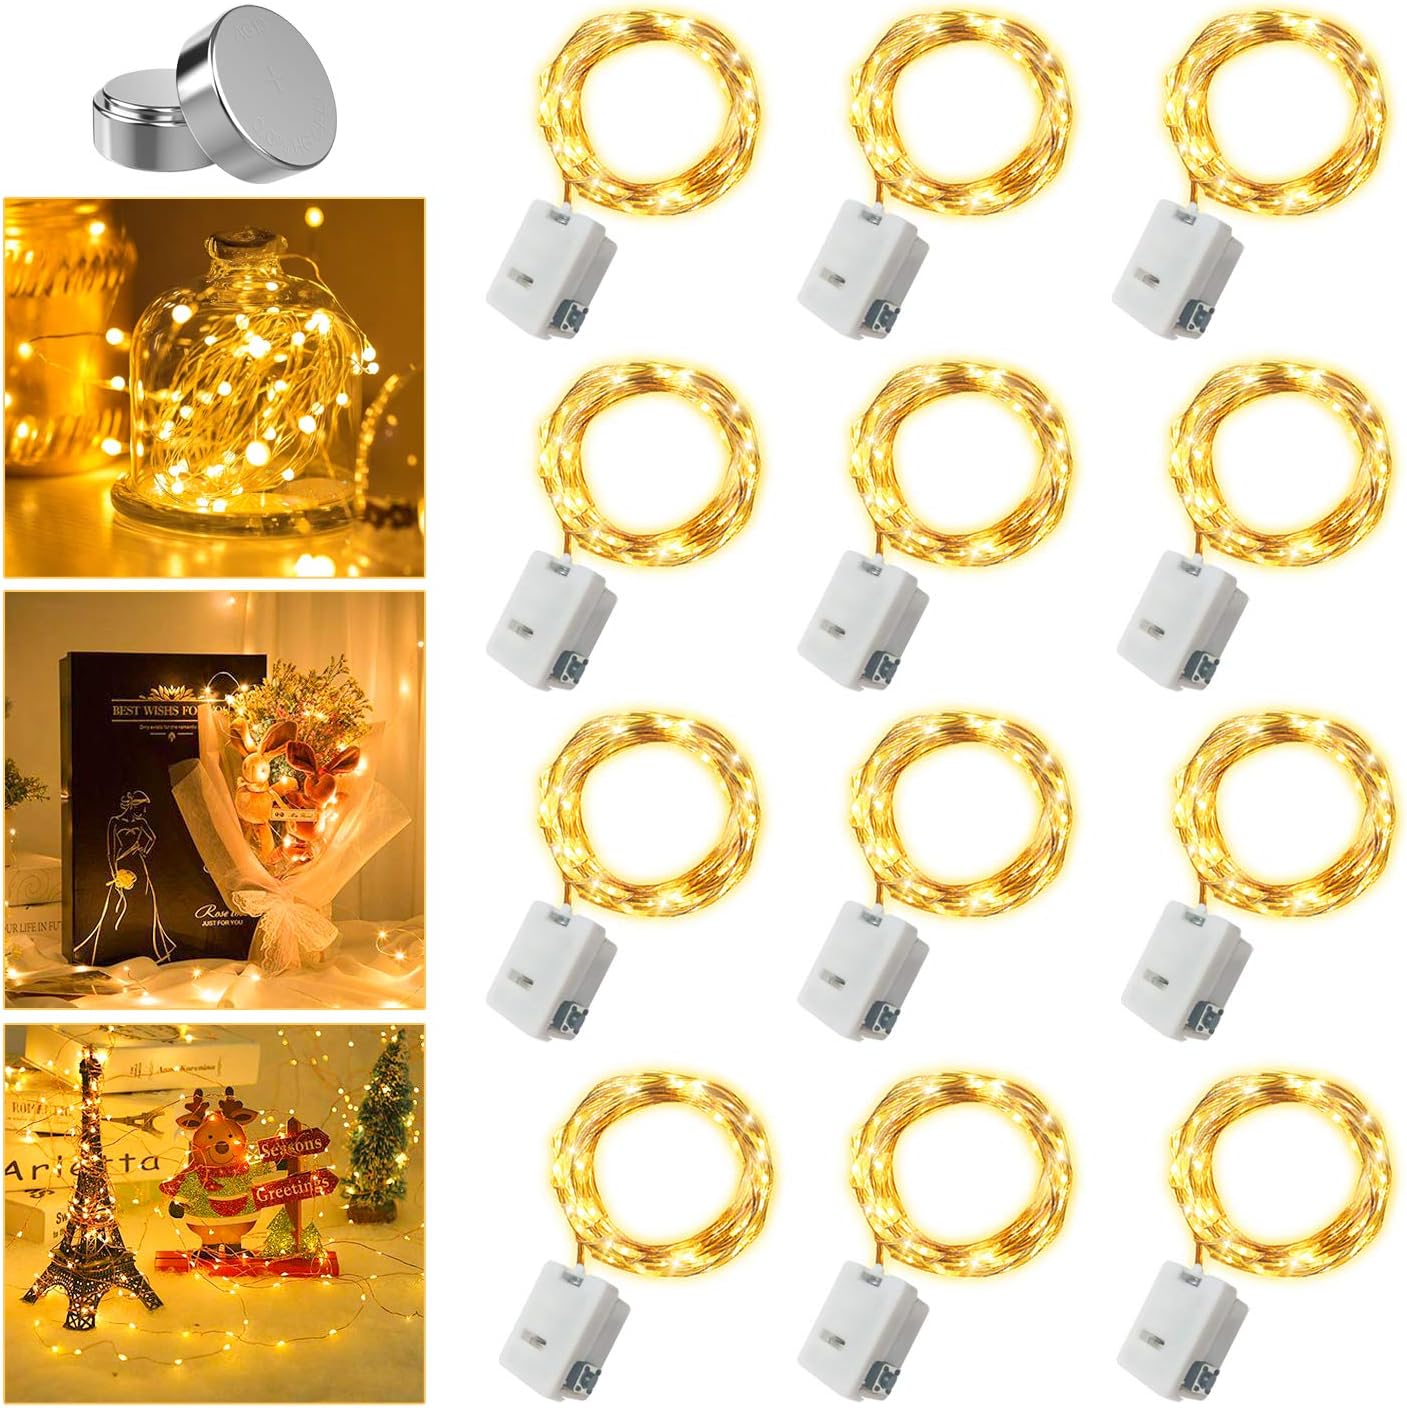 12 Pack Fairy Lights Battery Operated, 3 Speed Modes, Extra 12 Batteries for Replacement, 7Ft 20 LED Mini String Lights, Waterproof Copper Wire, Twinkle Firefly Lights for Christmas Decorations